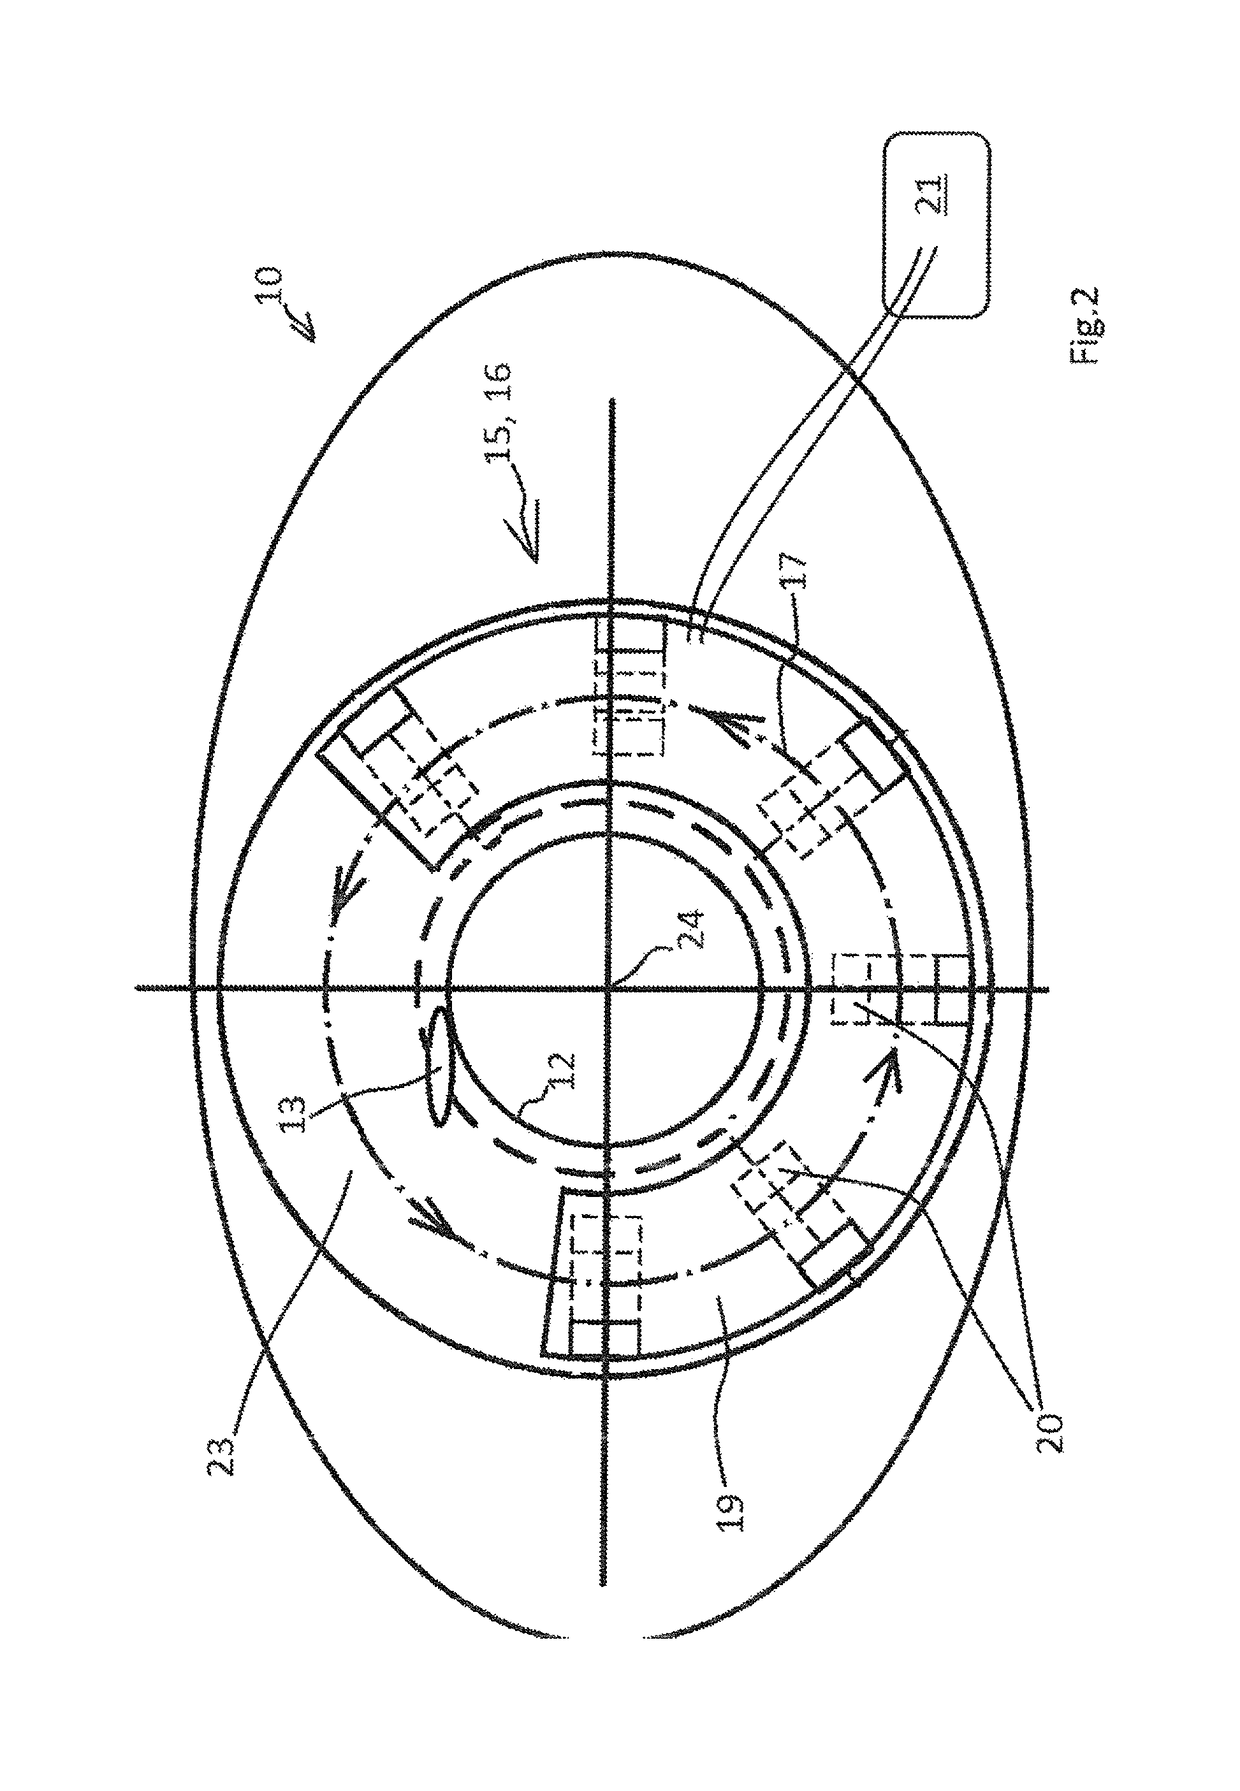 Device for producing cuts or perforations on an eye